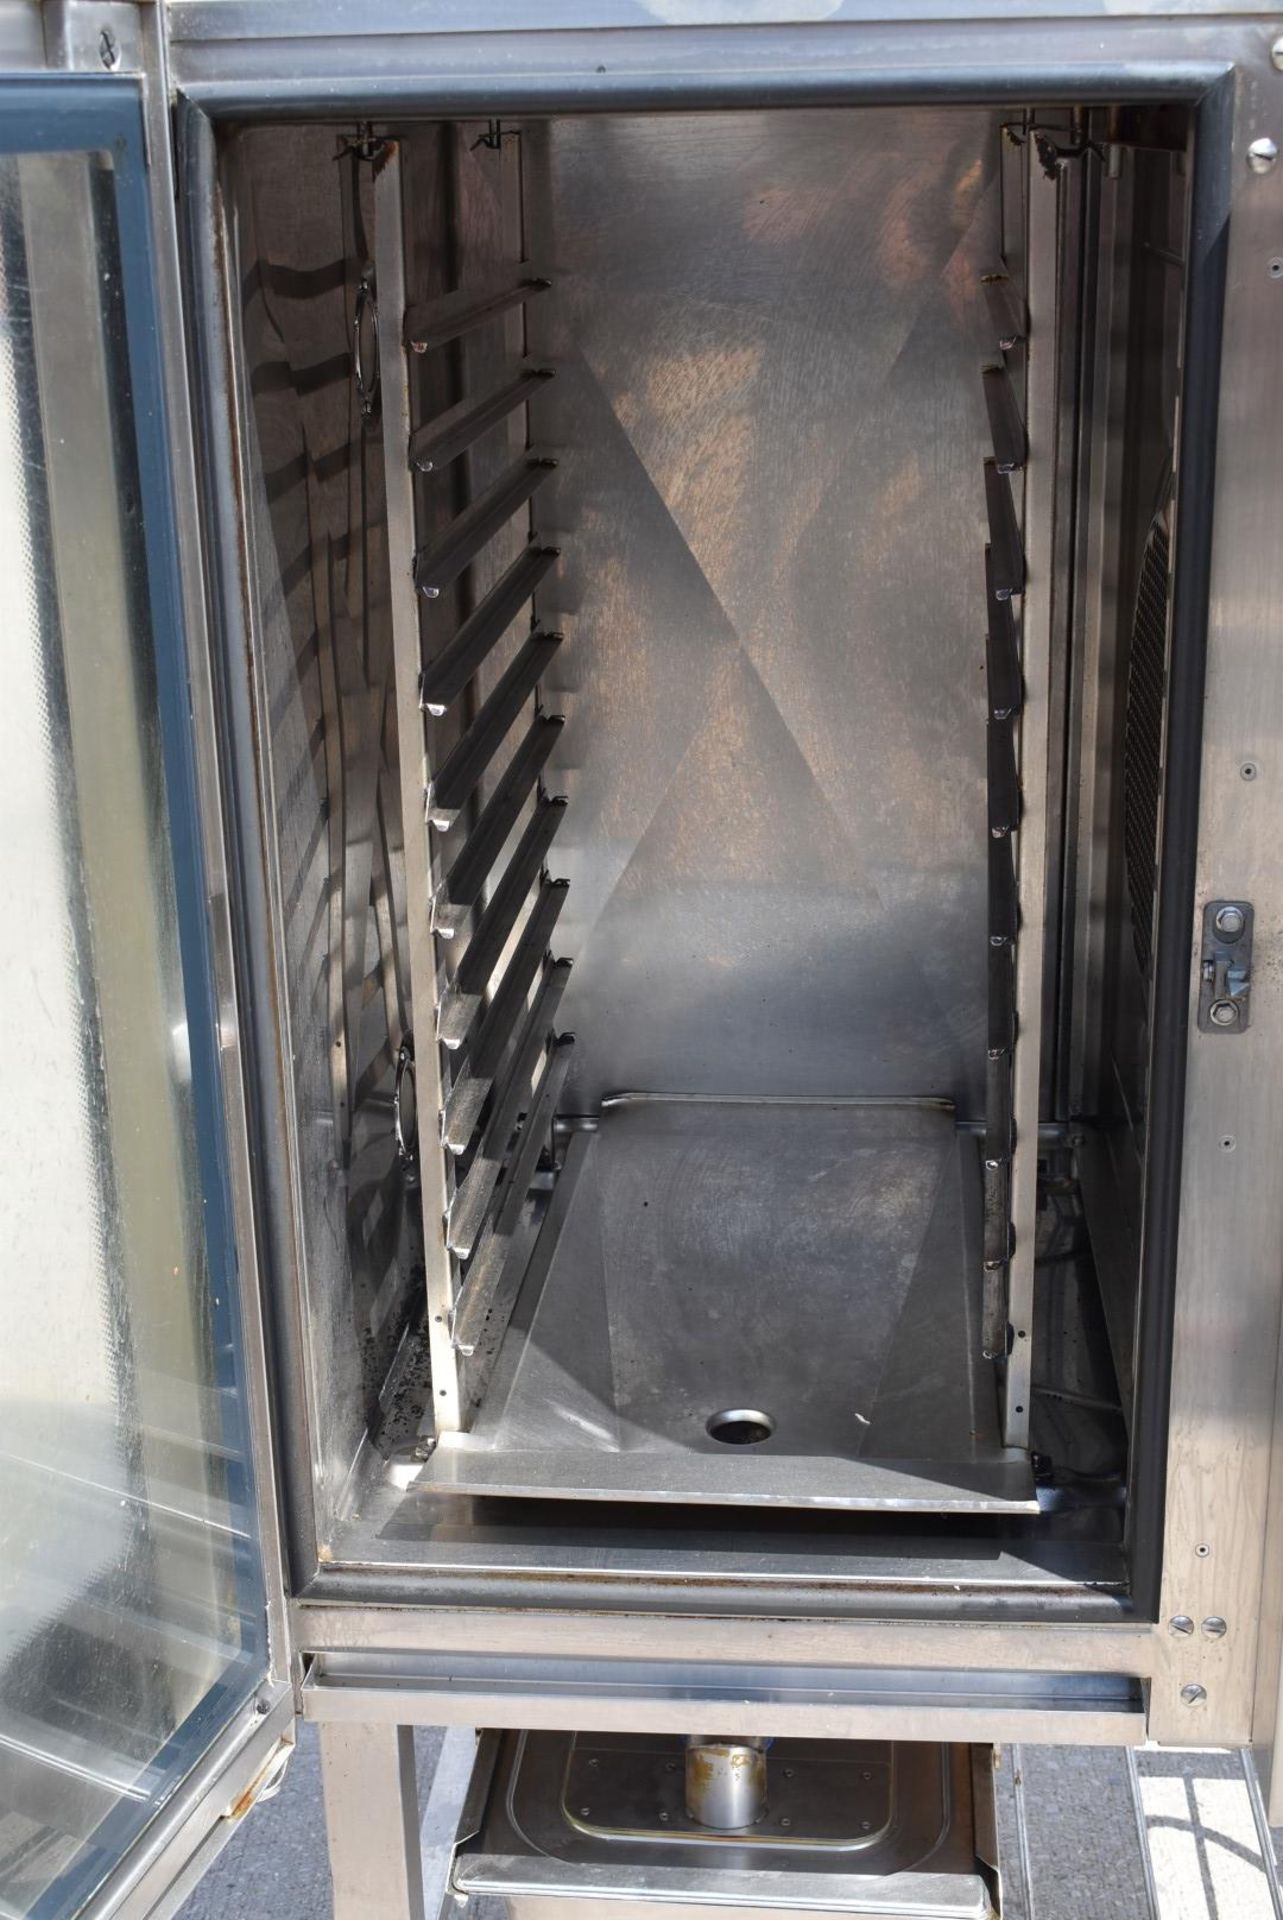 1 x Houno CPE 1.06 Electric Combi Oven - 3 Phase Combi Oven With Various Pre-Set Cooking Options - Image 2 of 14